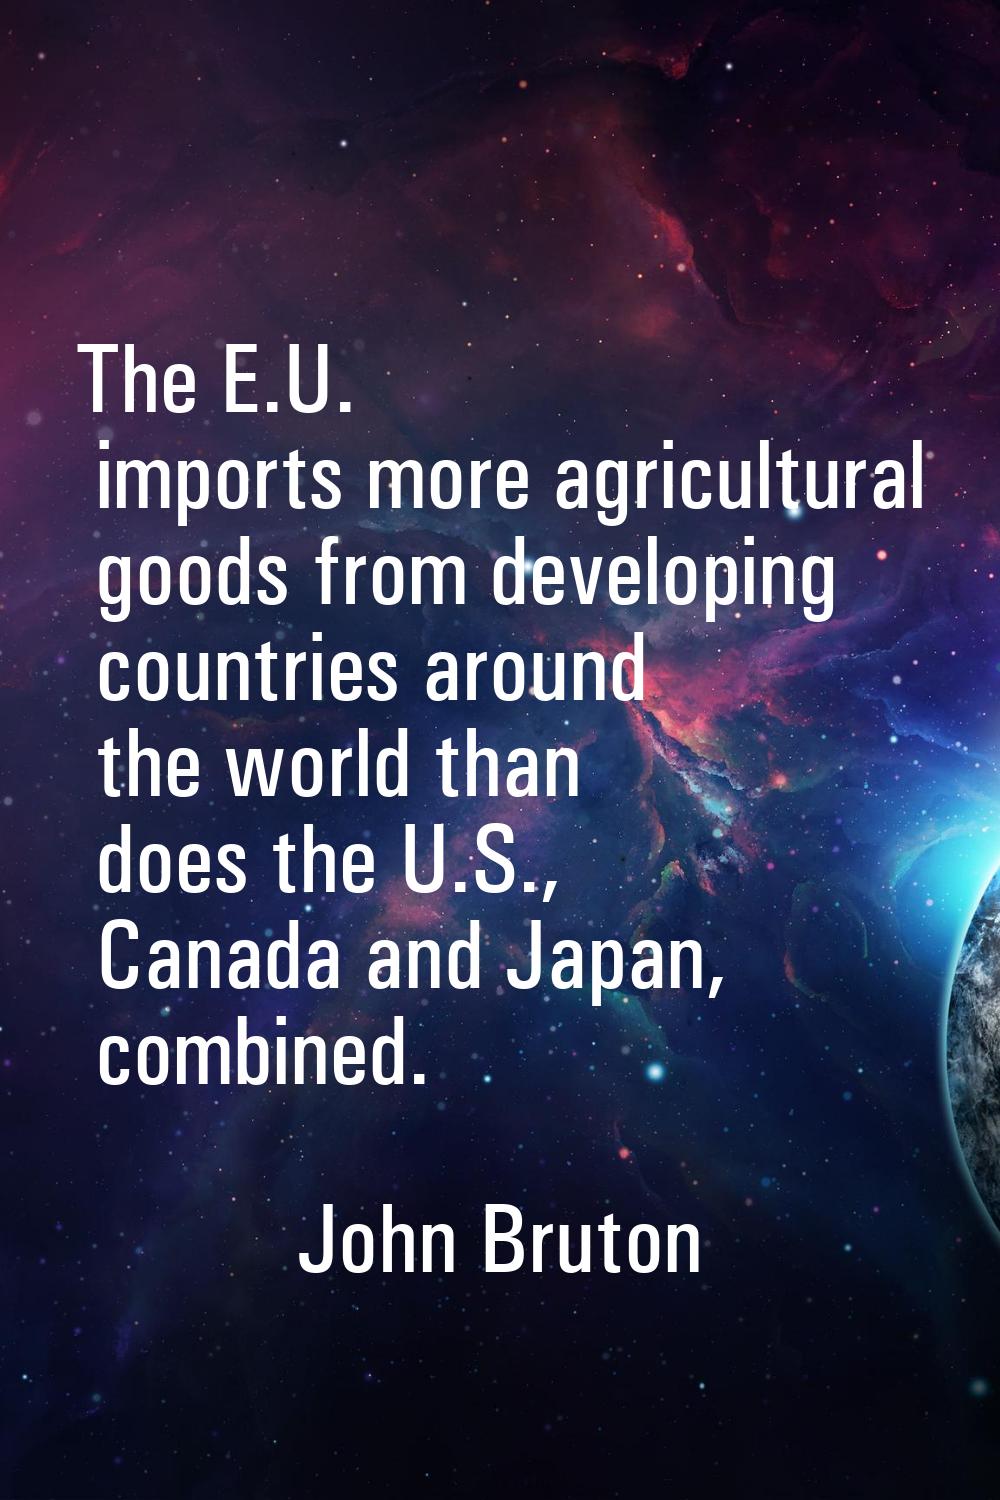 The E.U. imports more agricultural goods from developing countries around the world than does the U